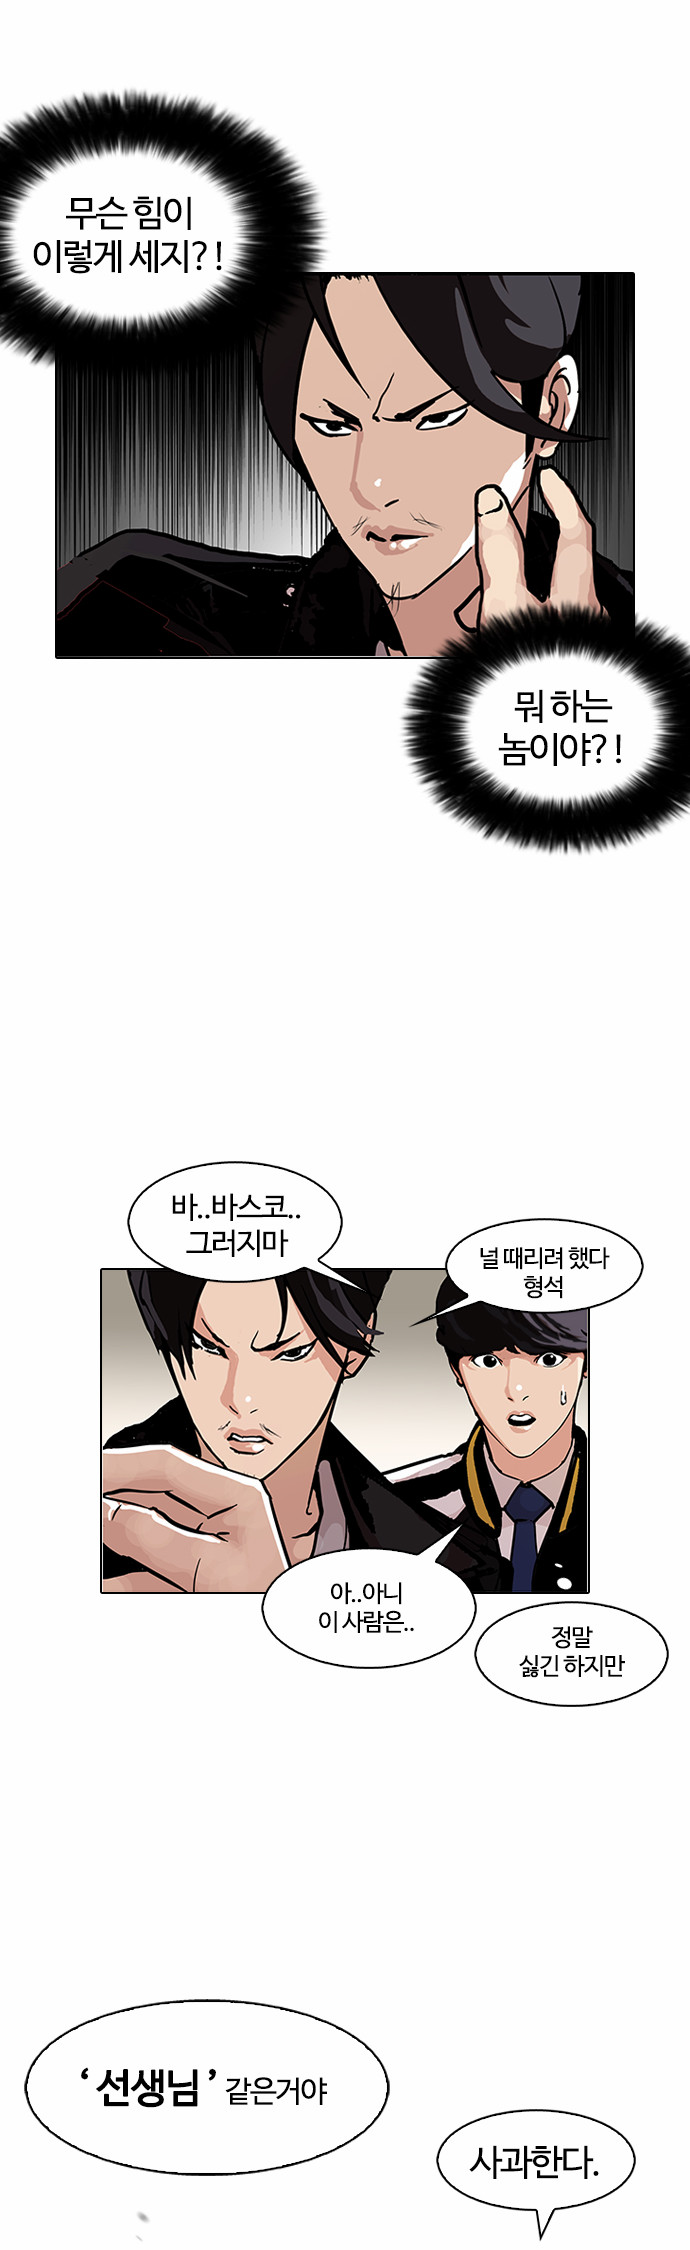 Lookism - Chapter 105 - Page 4